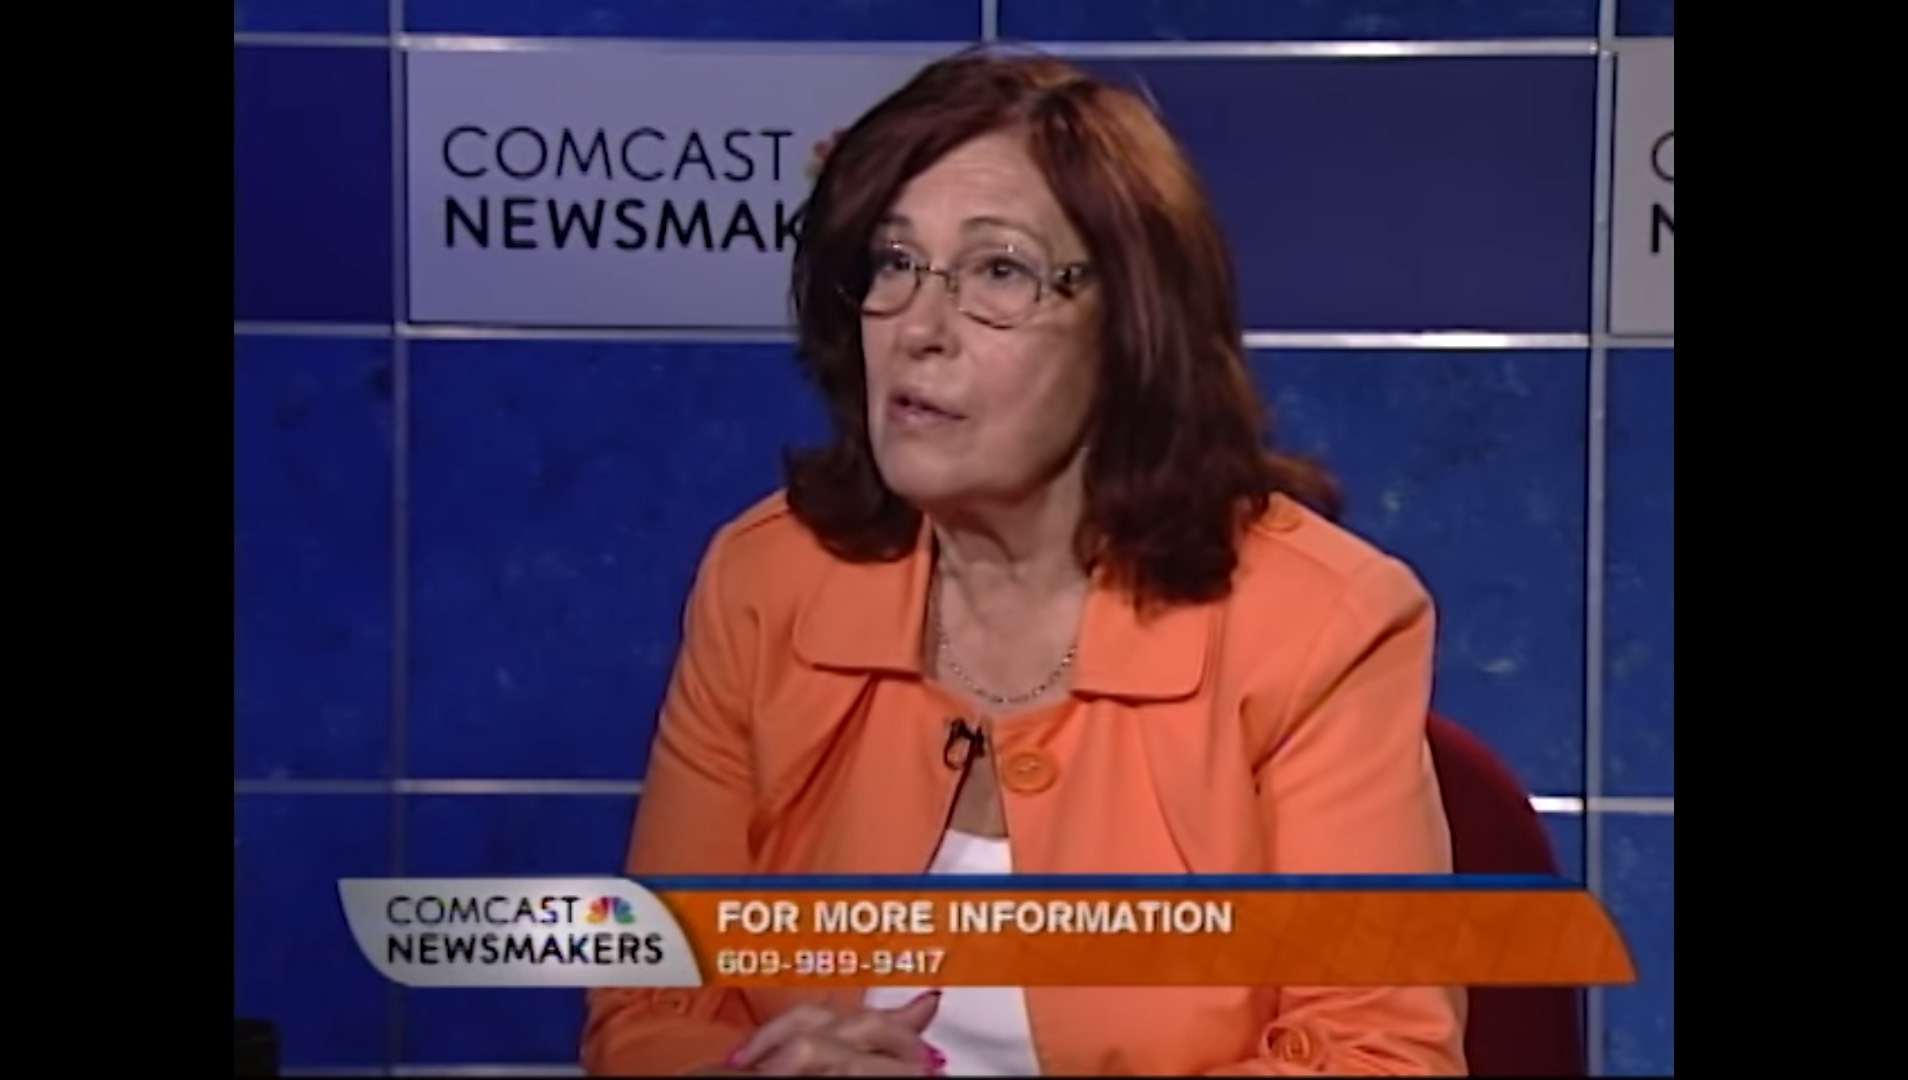 New Family Campus Makes News on Comcast Newsmakers